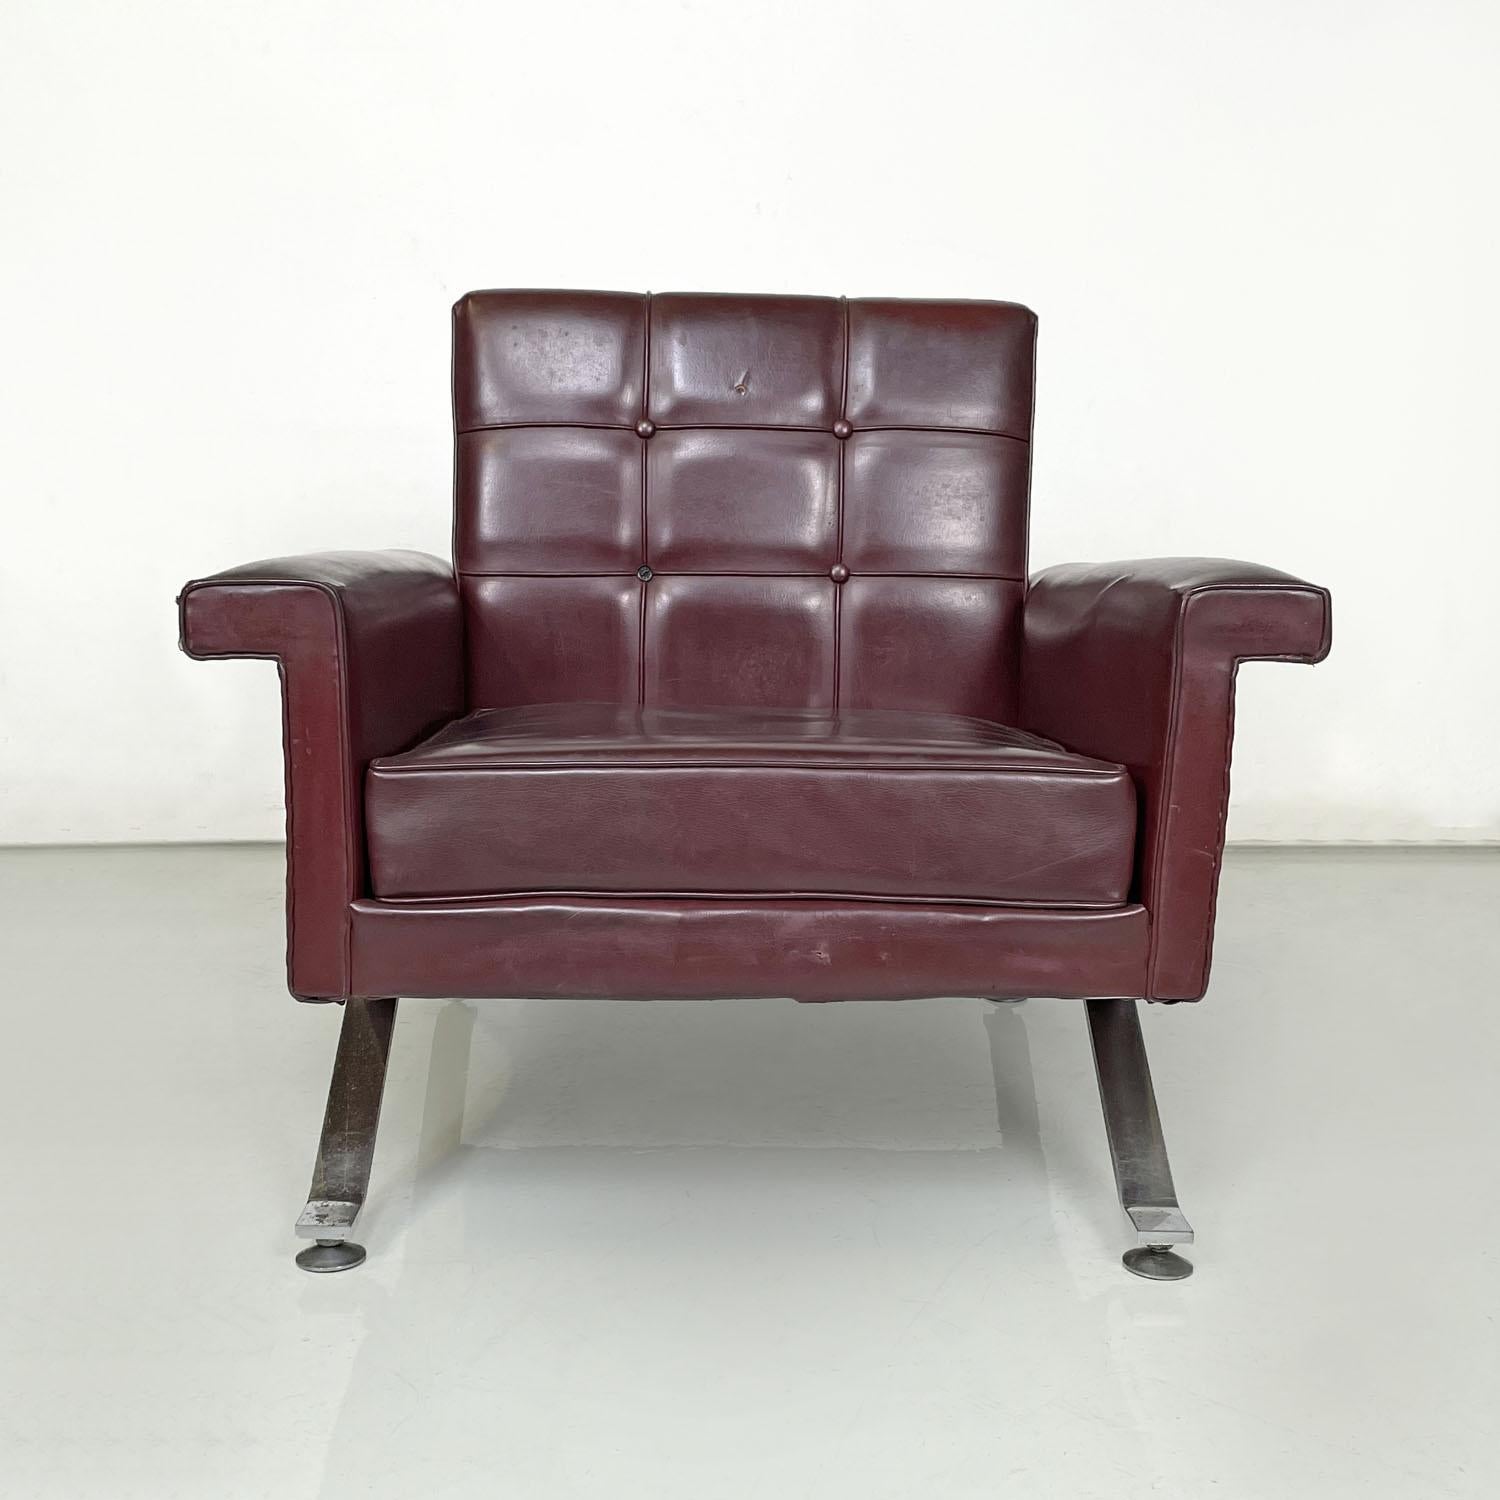 Steel Italian mid-century modern leather armchairs by Ico Parisi for Cassina, 1960s For Sale